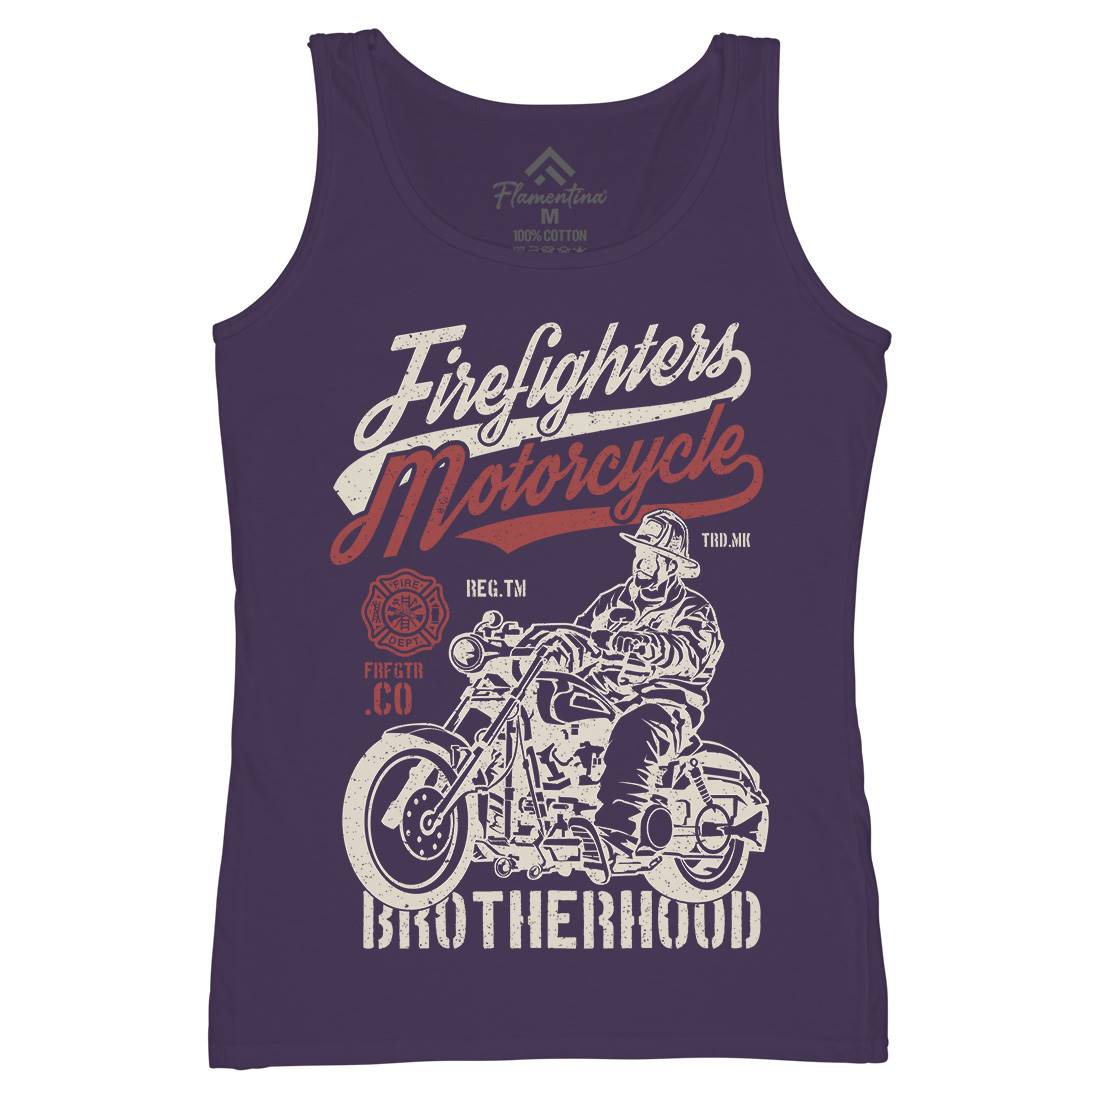 Motorcycle Womens Organic Tank Top Vest Firefighters A658